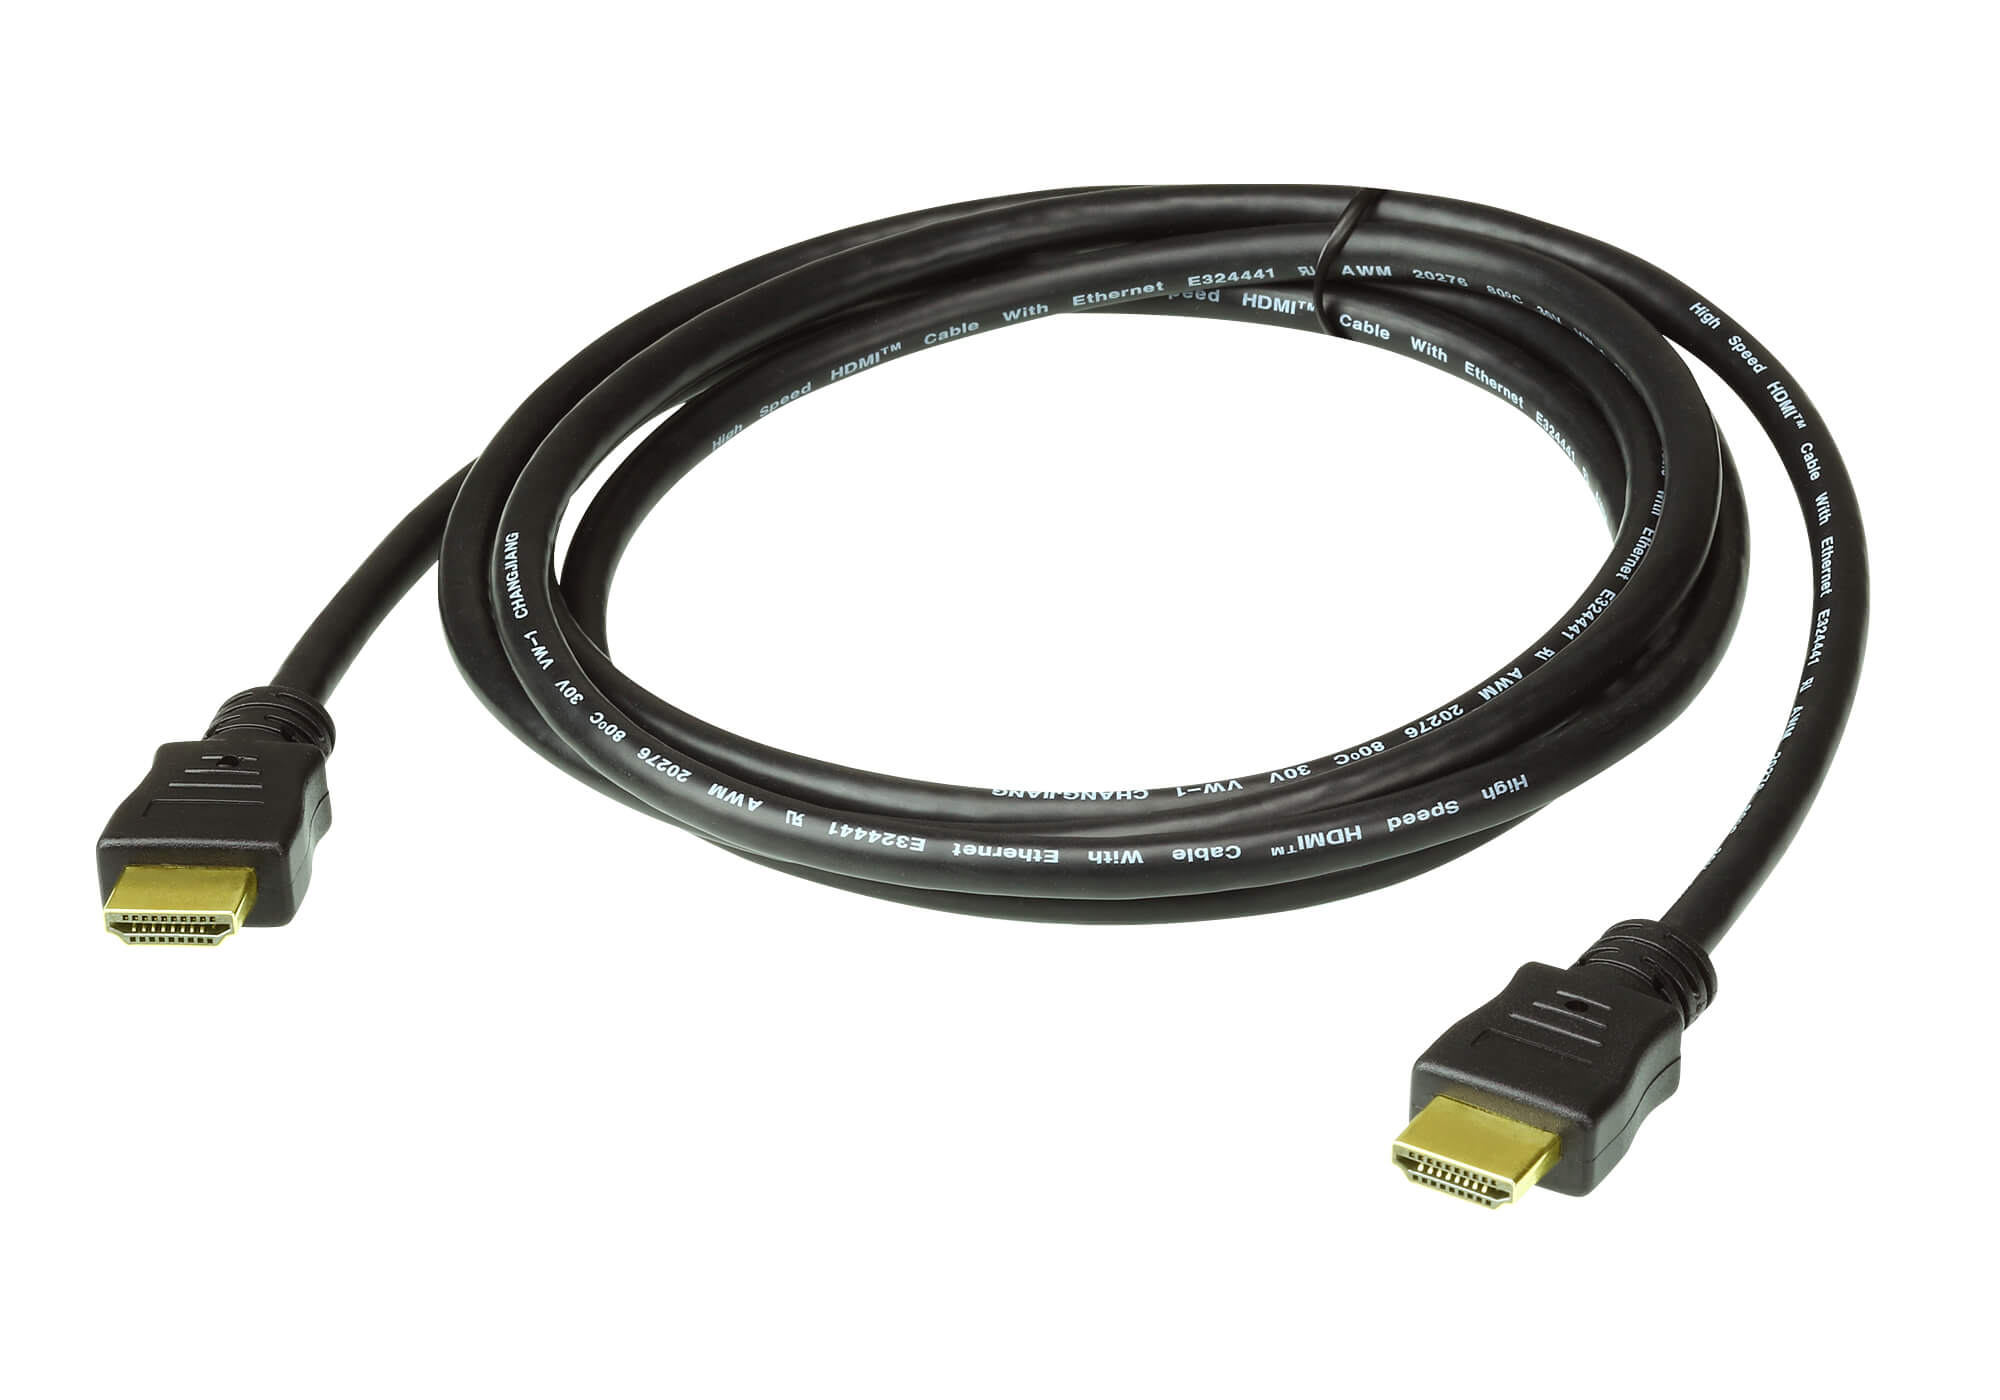 CABLE HDMI 20 METROS V1.4 ECO CROMAD - NN COMPUTERS